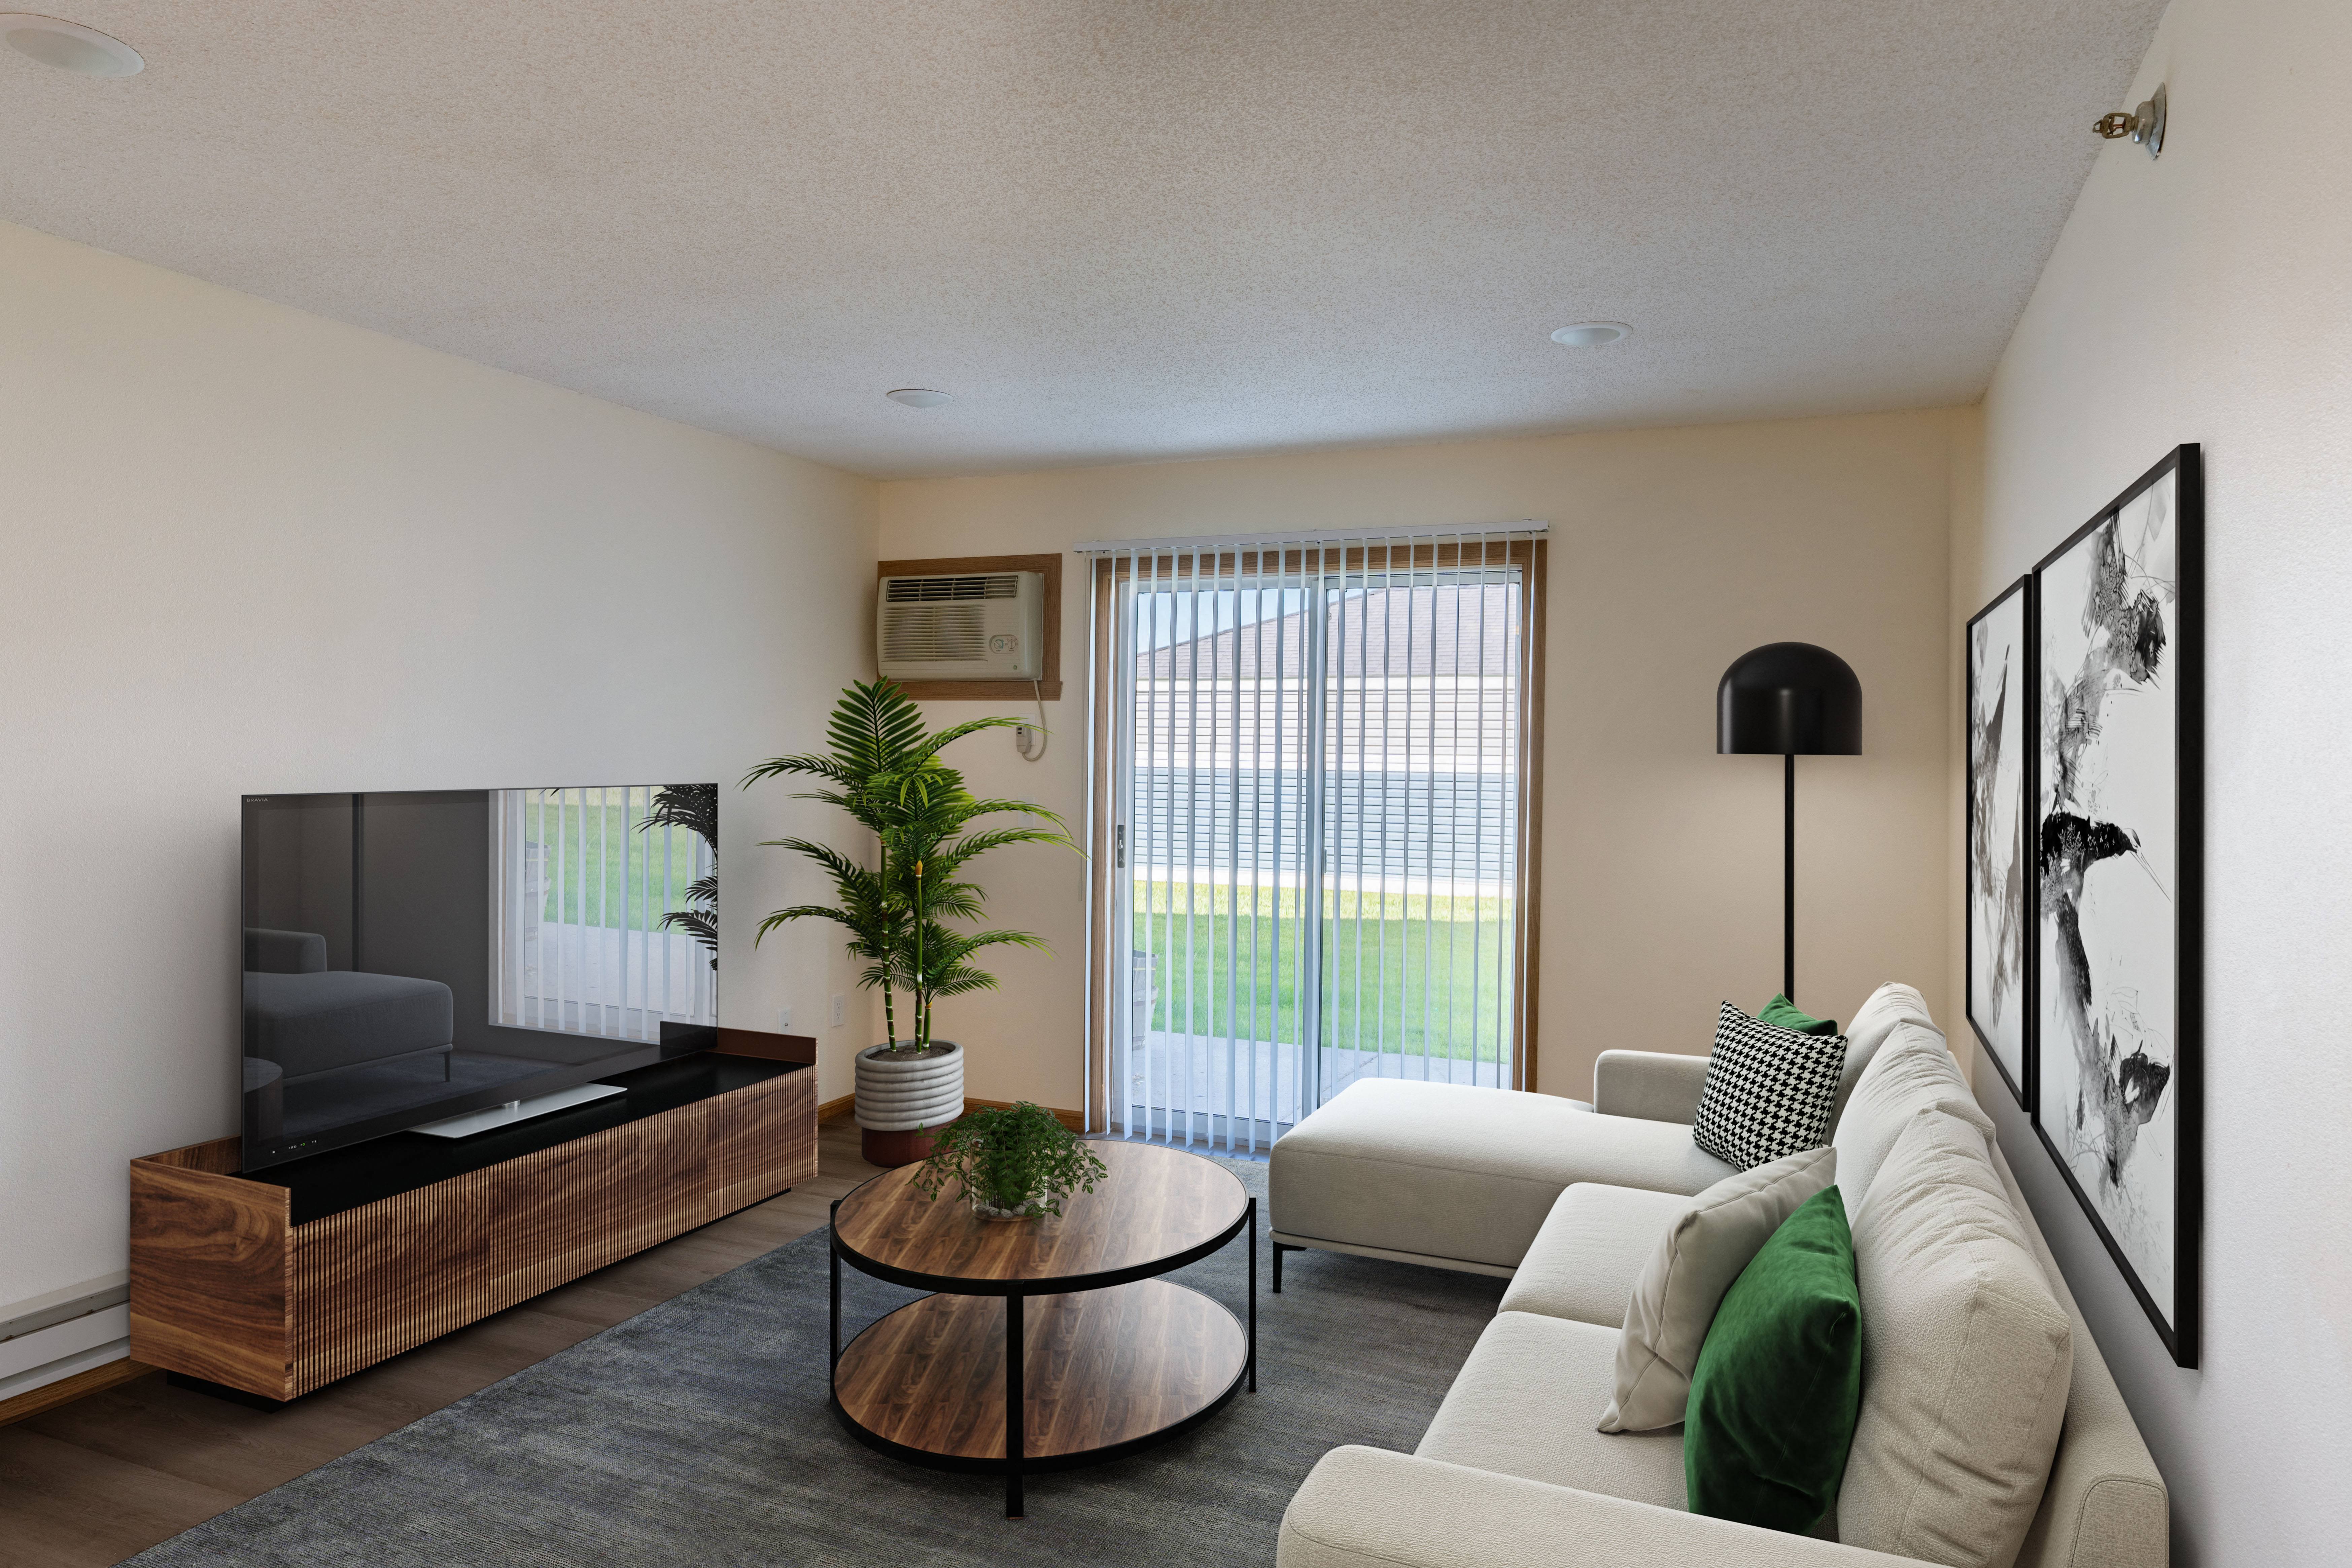 Fargo, ND Lake Crest Apartments. A living room with beige walls and a sliding glass door